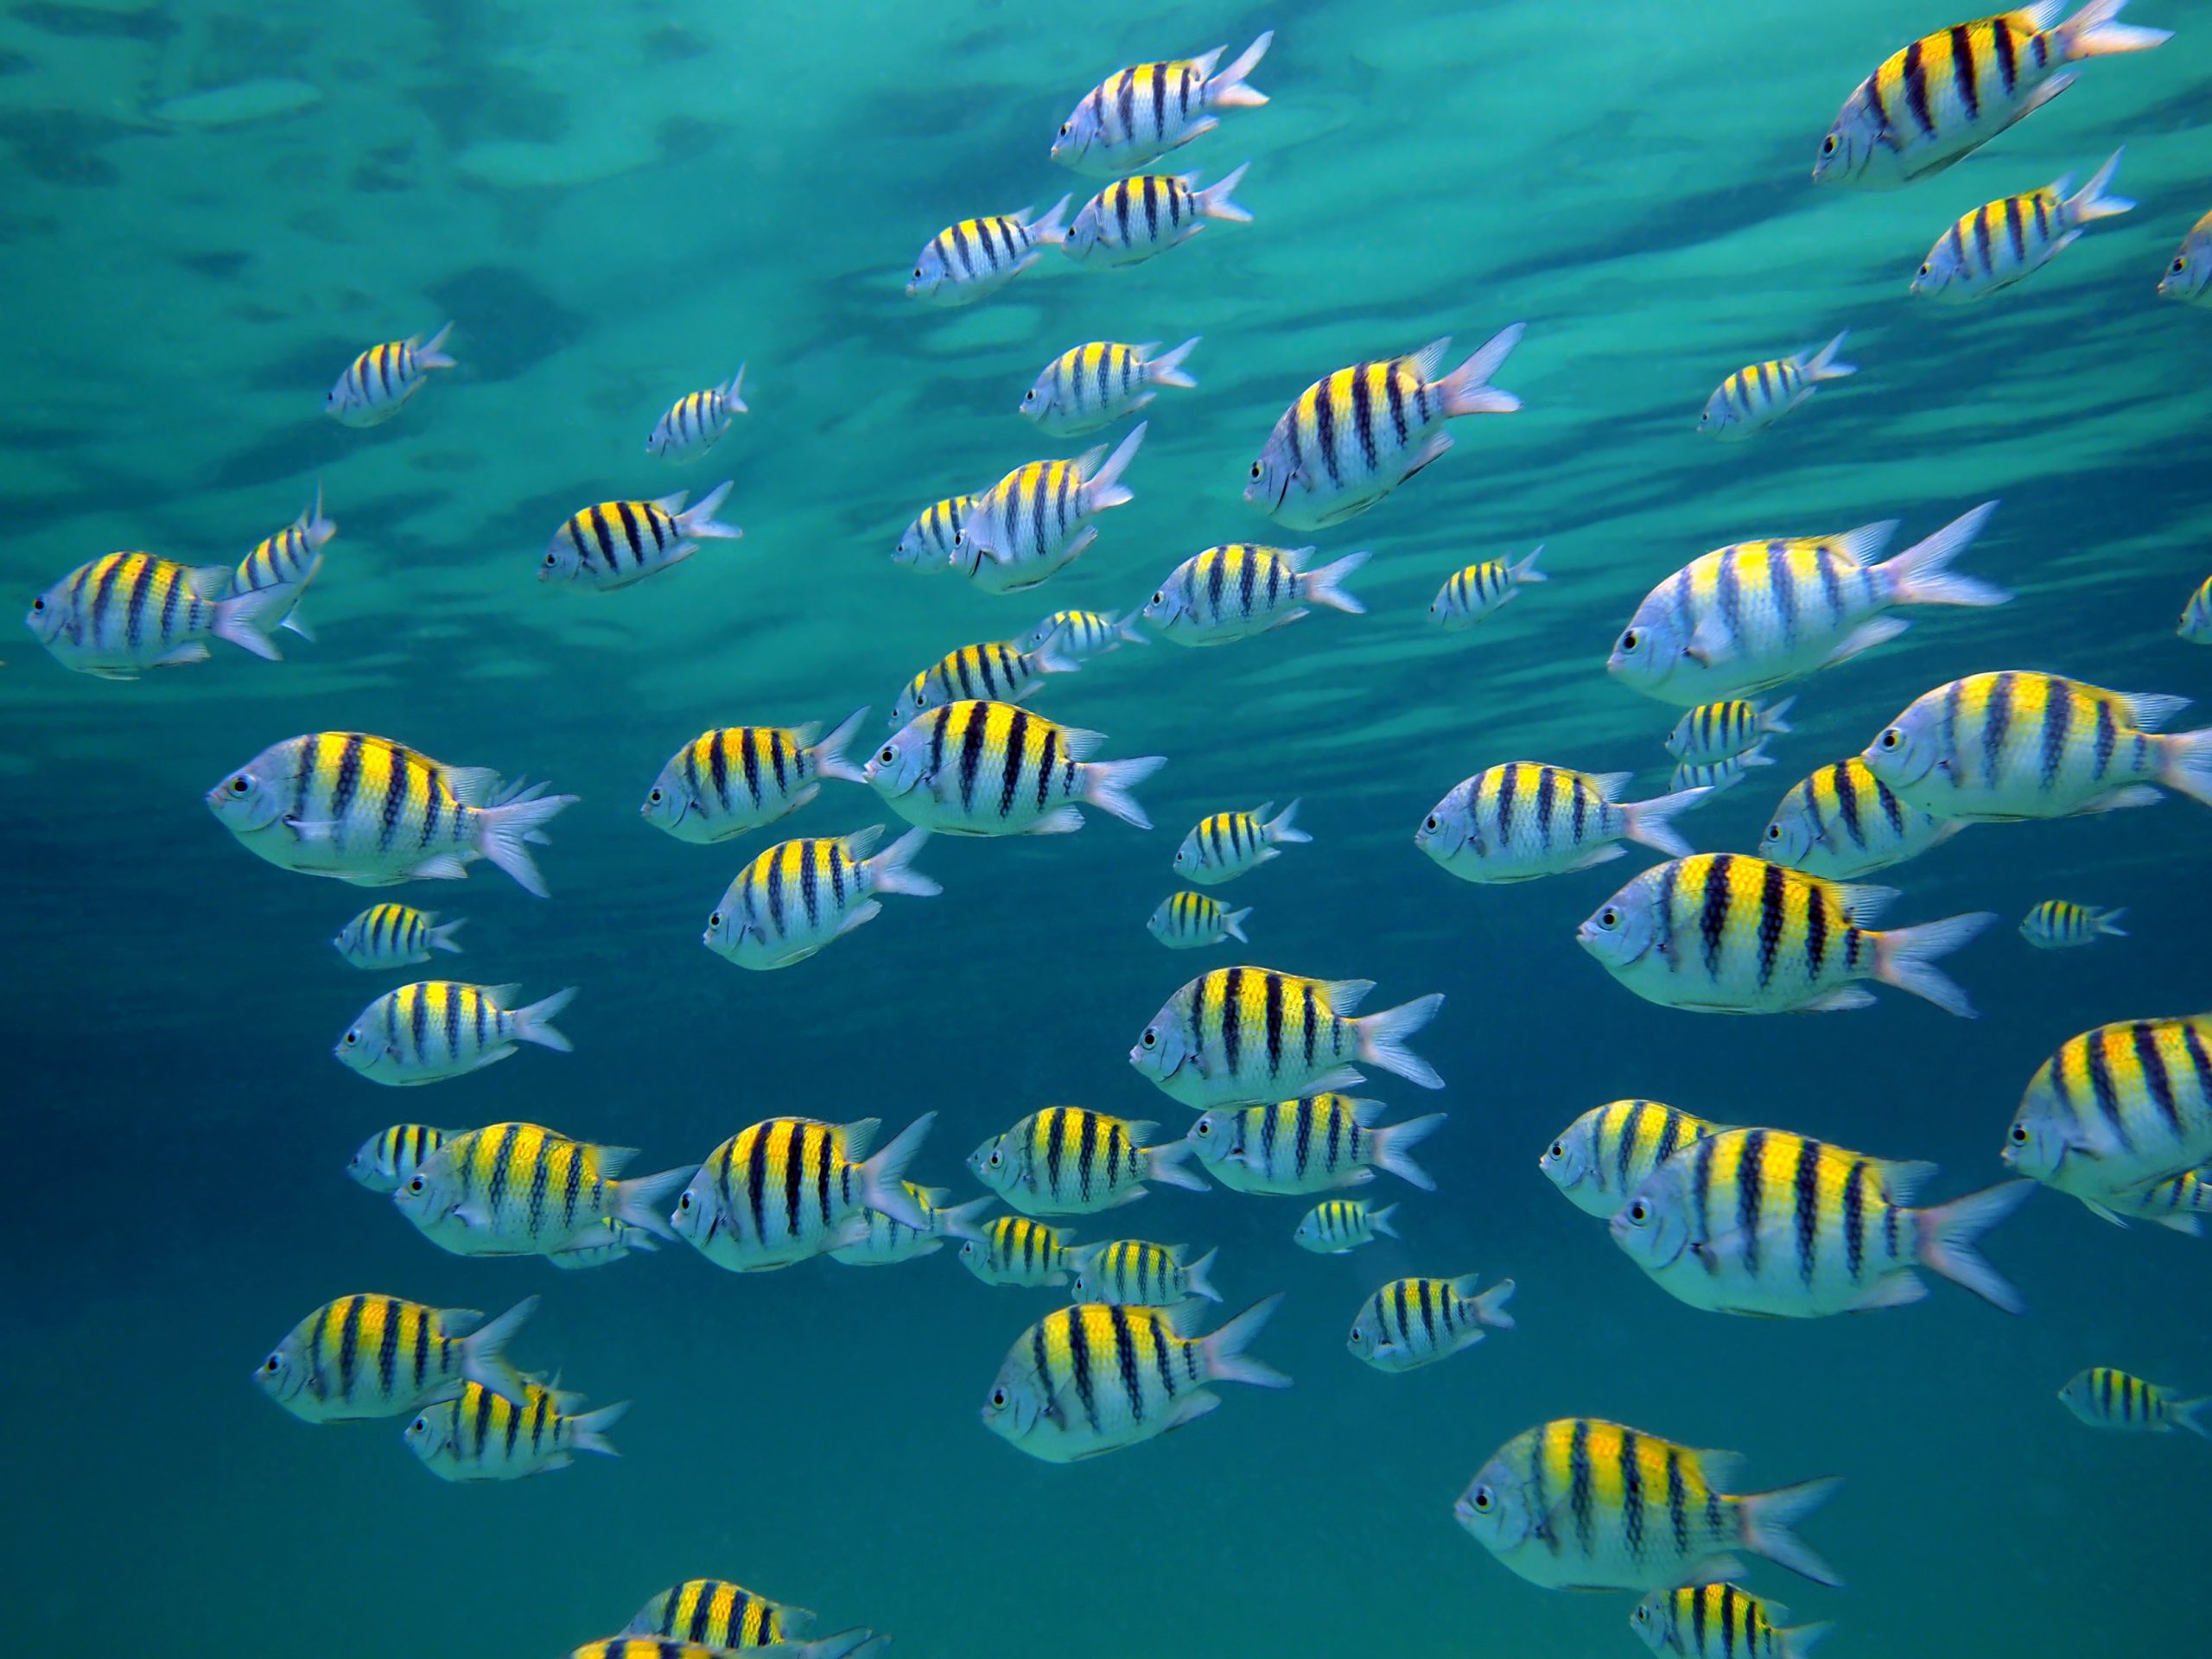 School of Sergeant-major fish with water surface in background, Caribbean sea